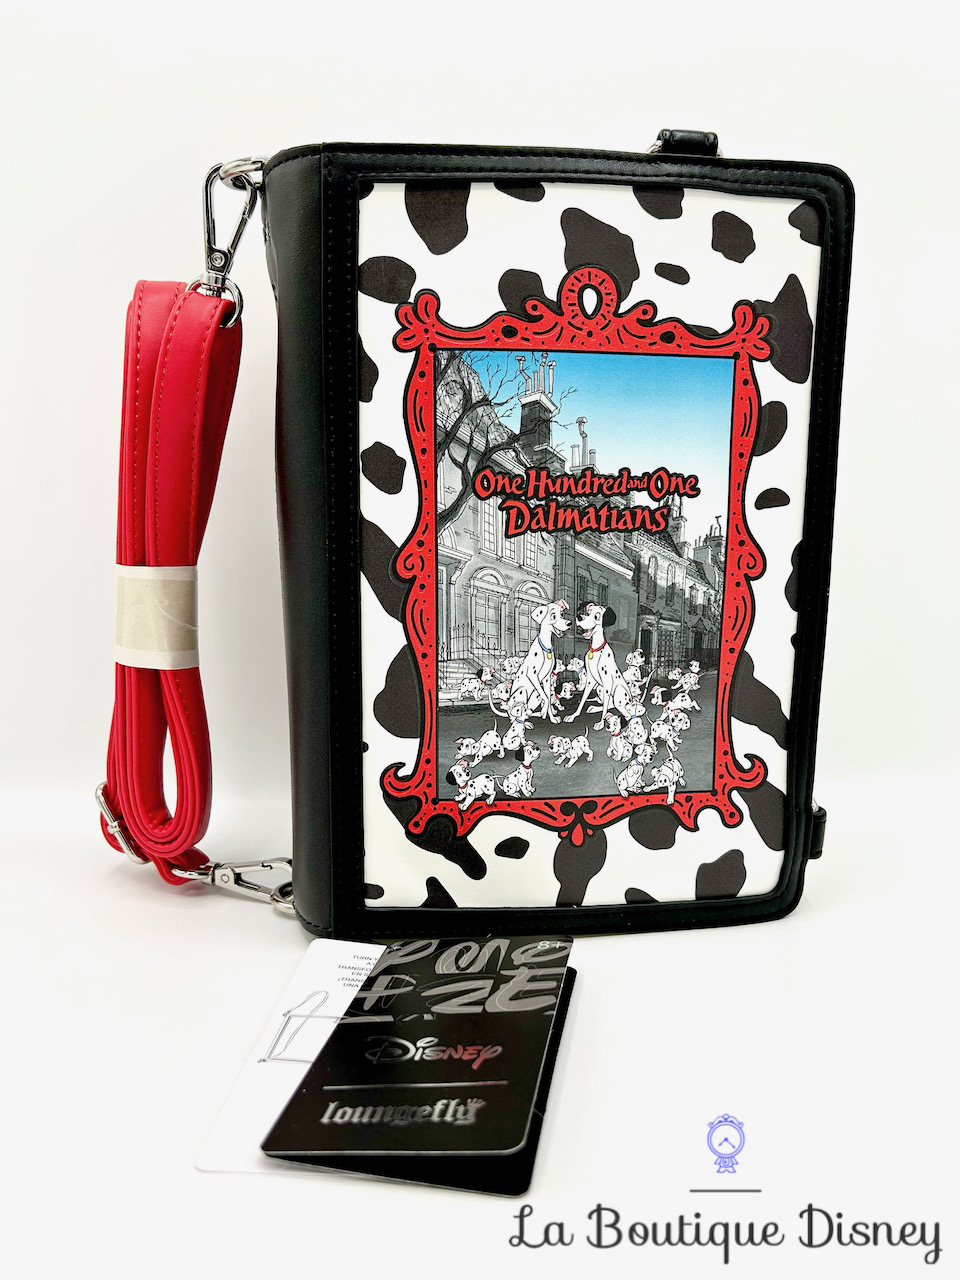 sac-a-dos-loungefly-les-101-dalmatiens-livre-story-book-convertible-0